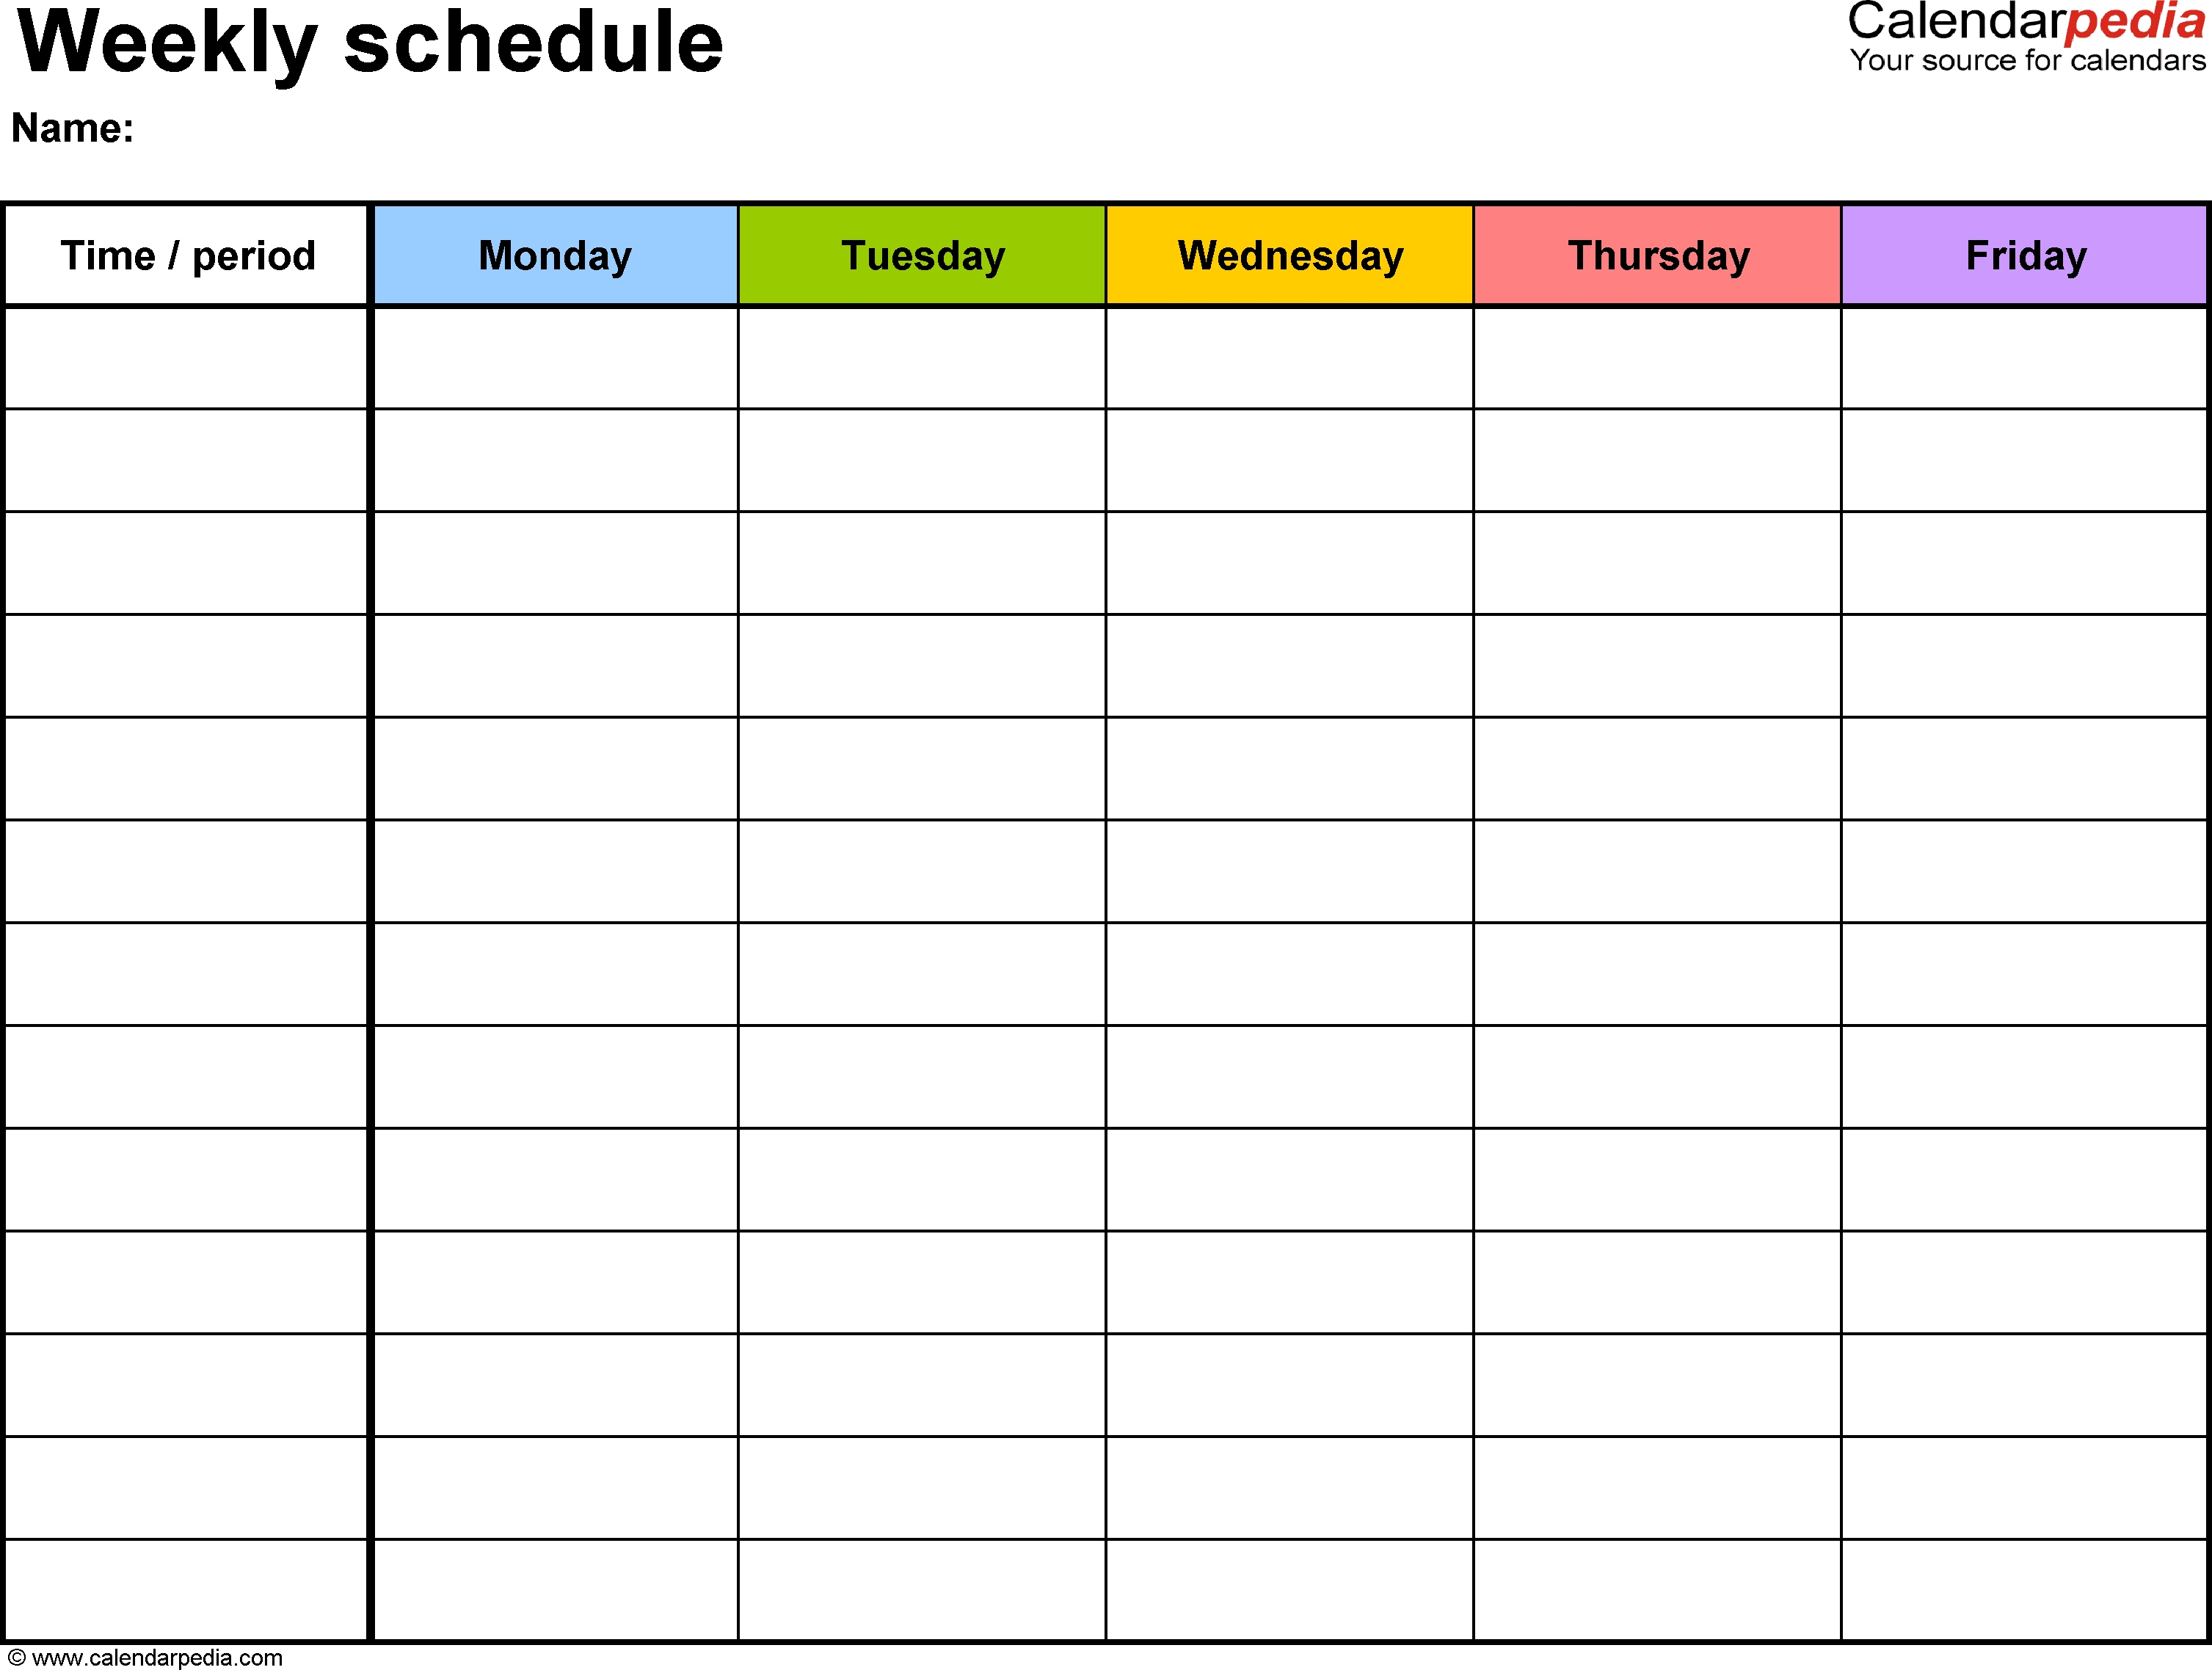 Free Weekly Schedule Templates For Word - 18 Templates within 5 Day Weekly Calendar Template